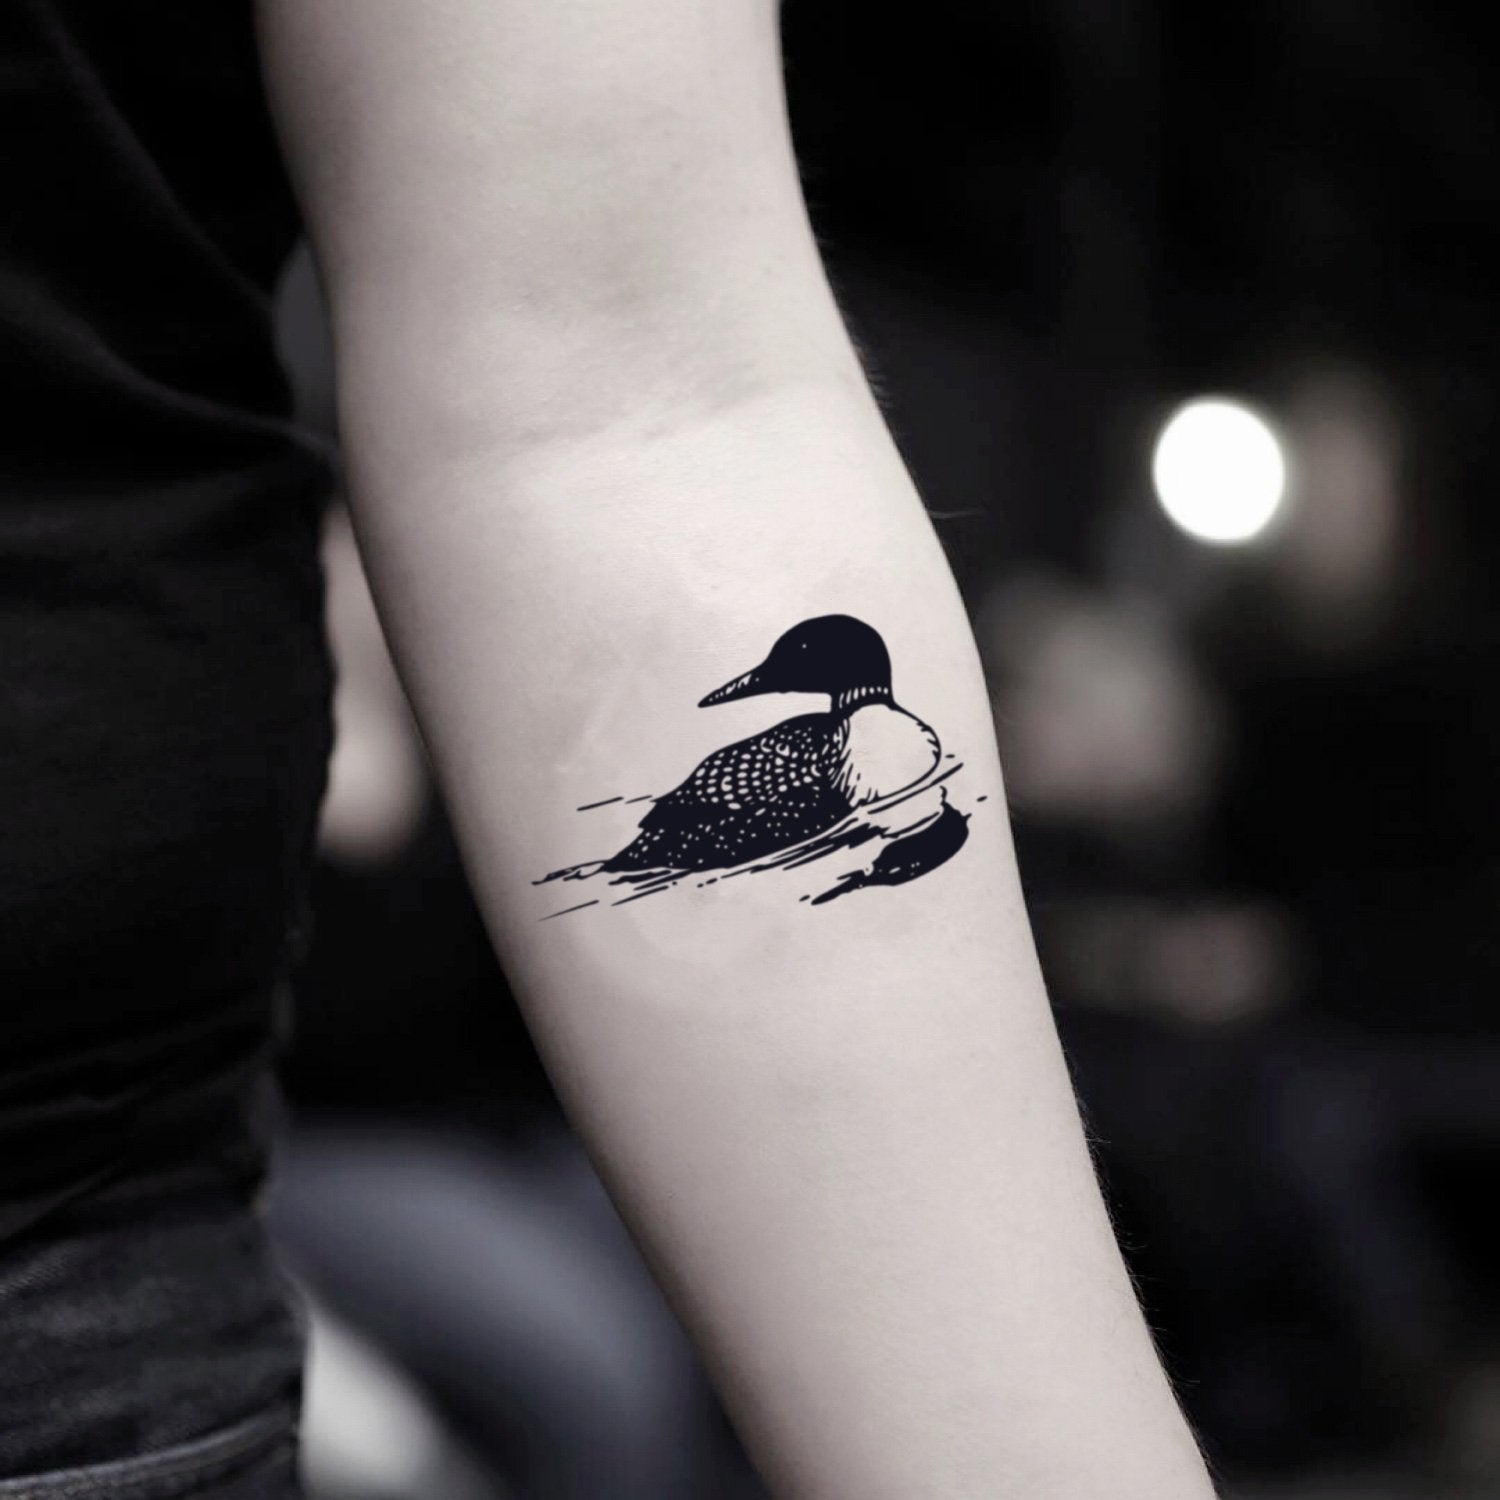 Animal Tattoos and their Meanings | by Jhaiho | Medium